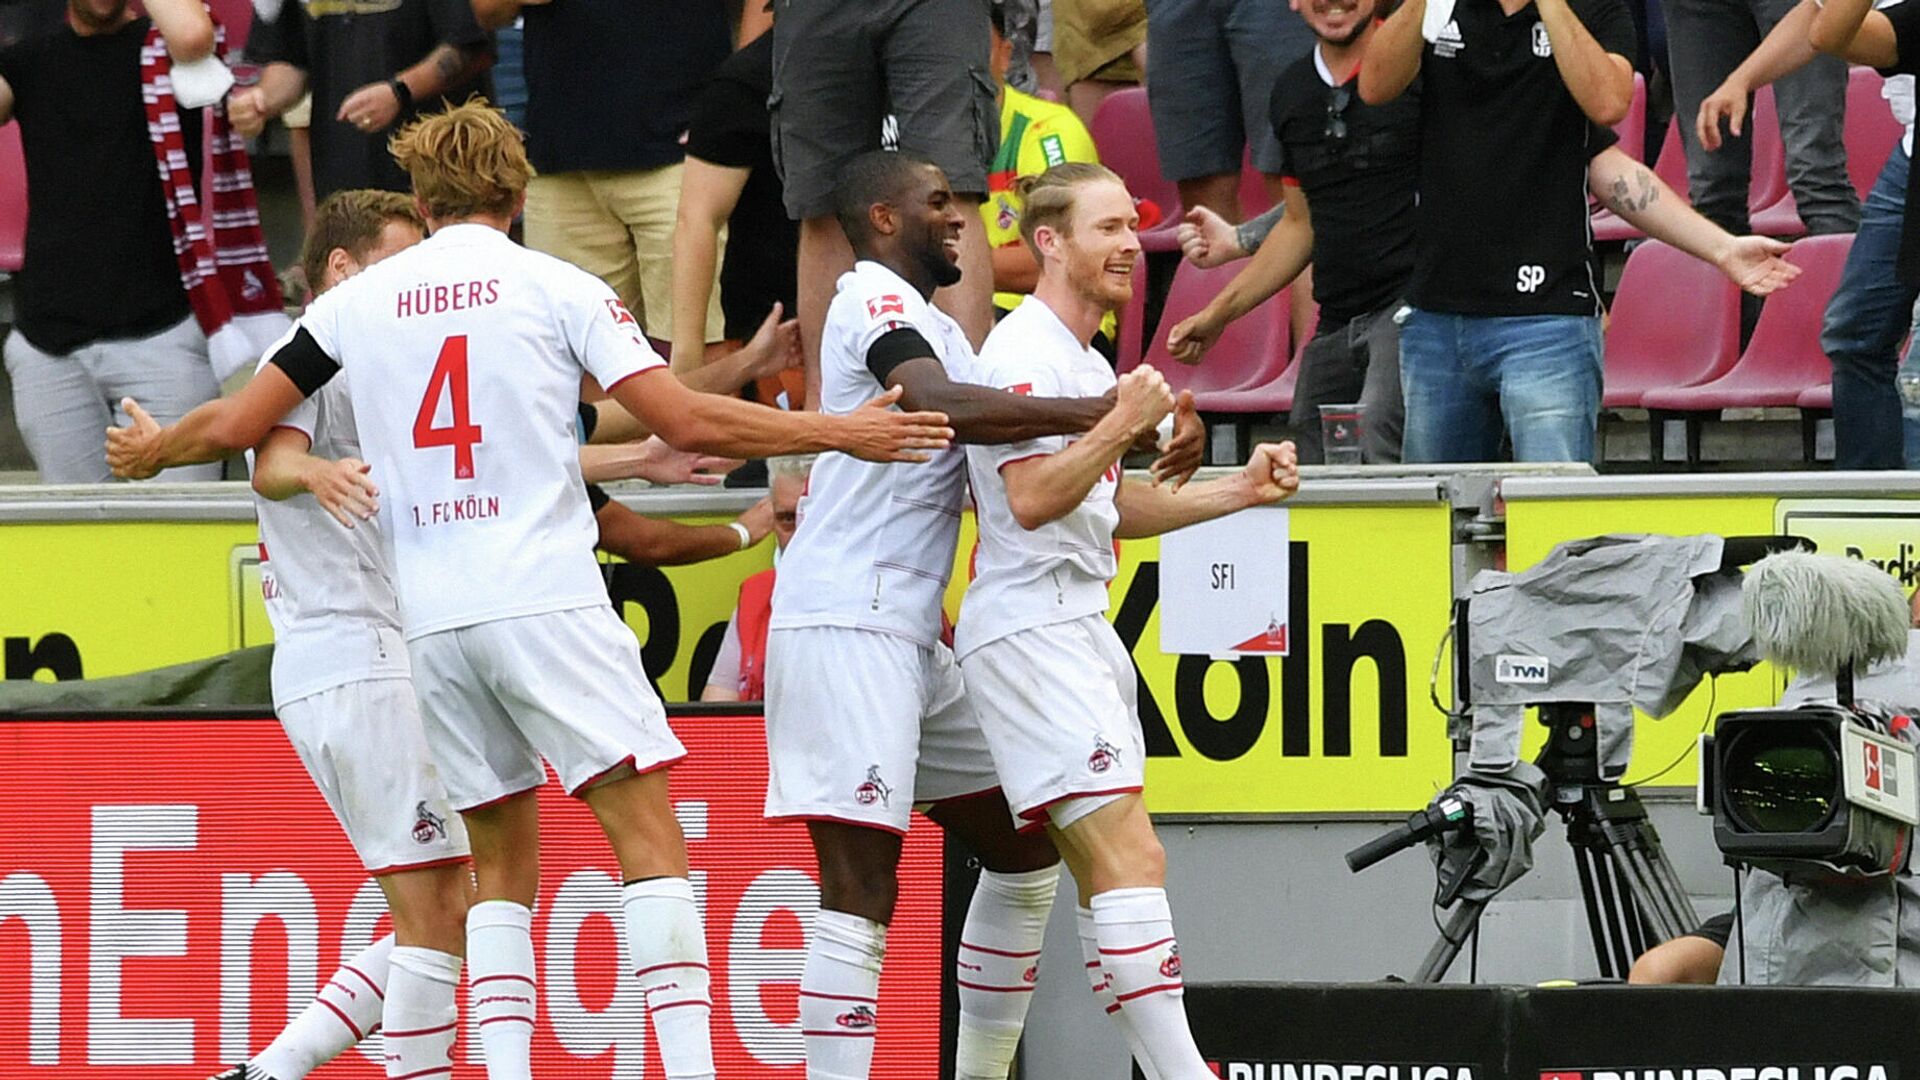 Cologne's Austrian midfielder Florian Kainz (R) celebrates scoring the 3-1 goal with teammates during the German first division Bundesliga football match between FC Cologne and Hertha BSC Berlin in Cologne, western Germany, on August 15, 2021. (Photo by UWE KRAFT / AFP) / DFL REGULATIONS PROHIBIT ANY USE OF PHOTOGRAPHS AS IMAGE SEQUENCES AND/OR QUASI-VIDEO - РИА Новости, 1920, 15.08.2021